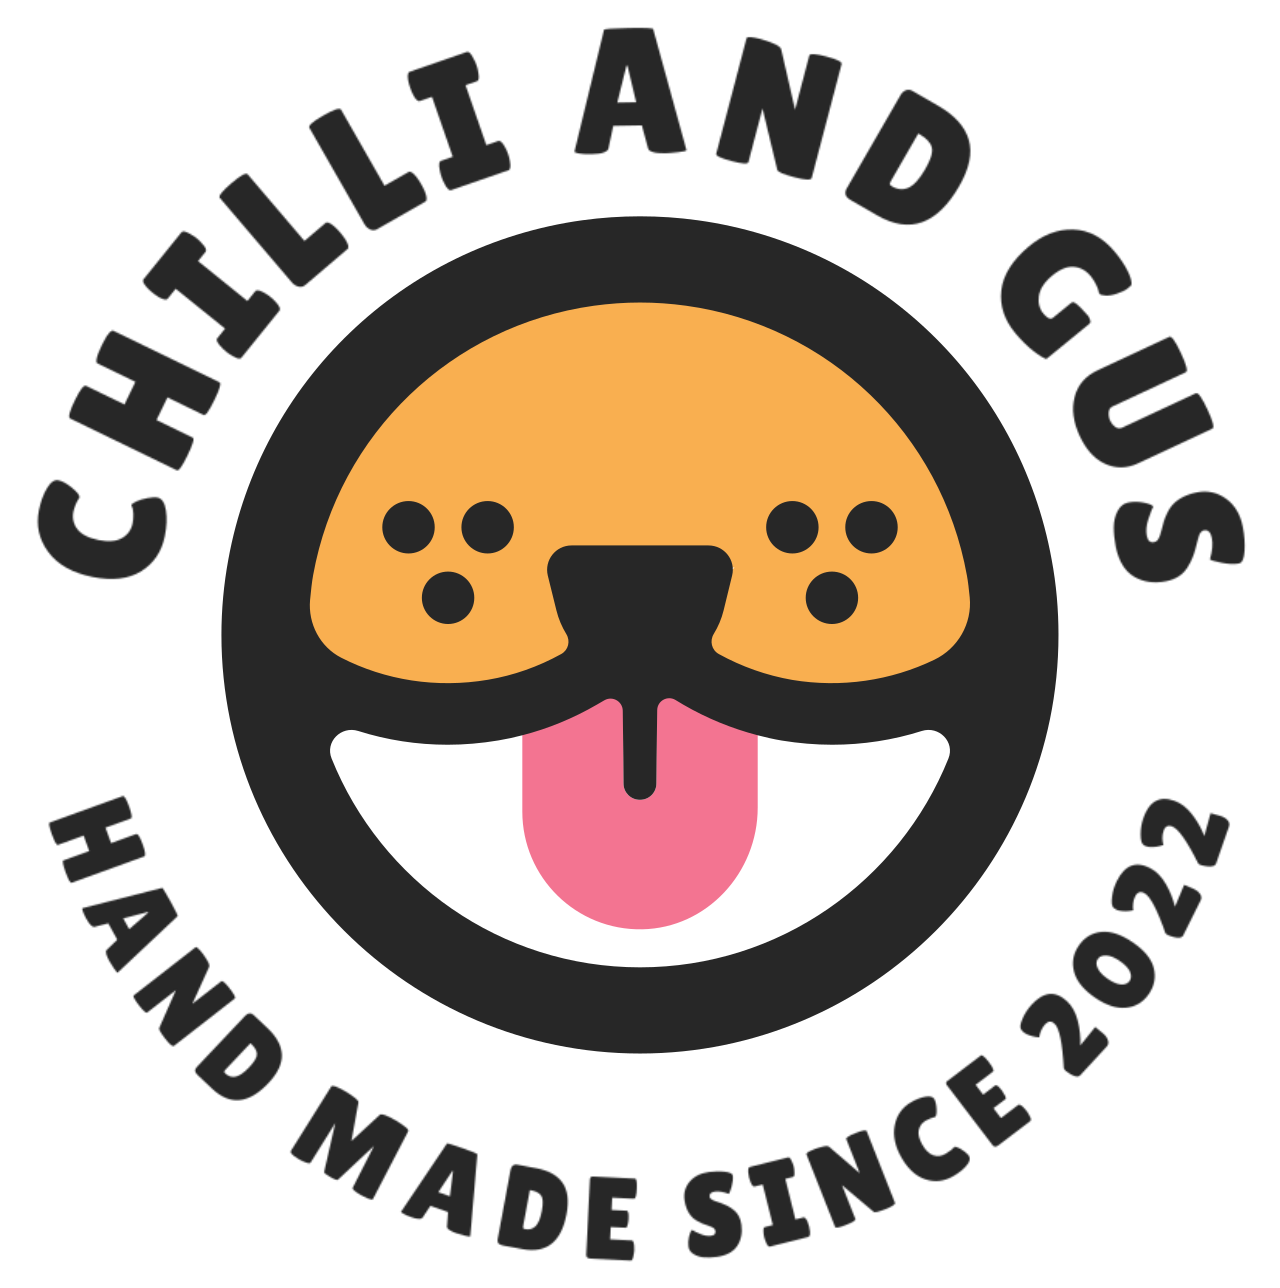 CHILLI AND GUS's web page